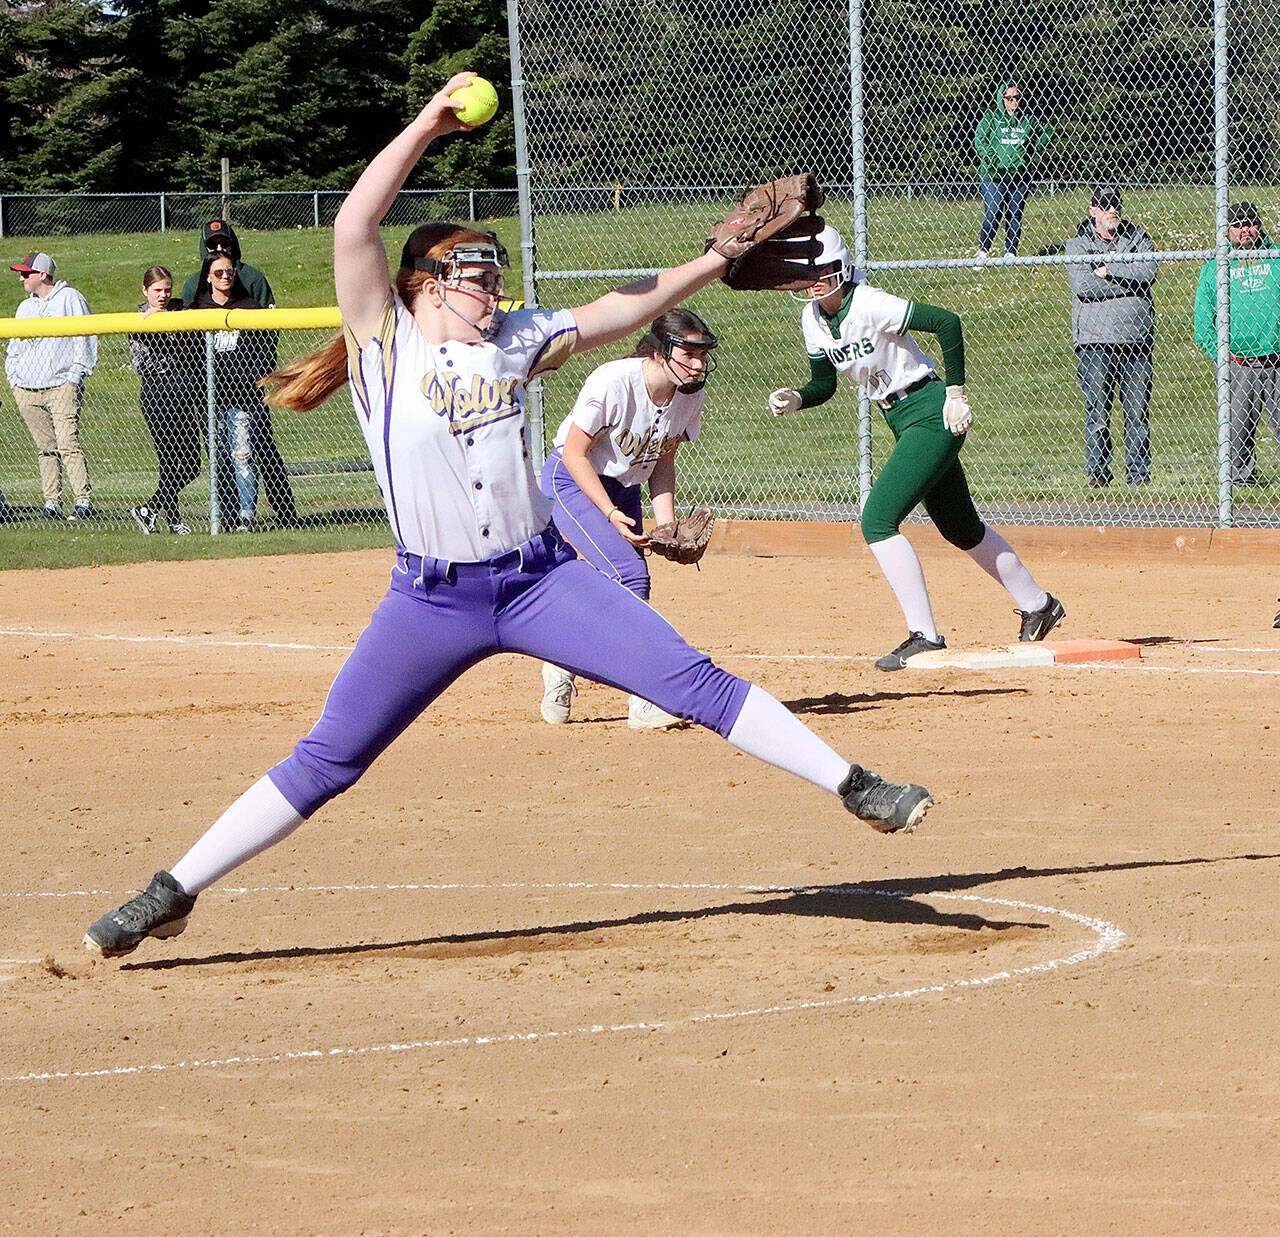 Dave Logan/for Peninsula Daily News
Sequim pitcher Nevaeh Owens delivers to the plate while Port Angeles baserunner first Lexie Smith gets ready to take off. Sequim first baseman Rylie Doig also in on the play as the No. 1-ranked Roughriders won 14-2.